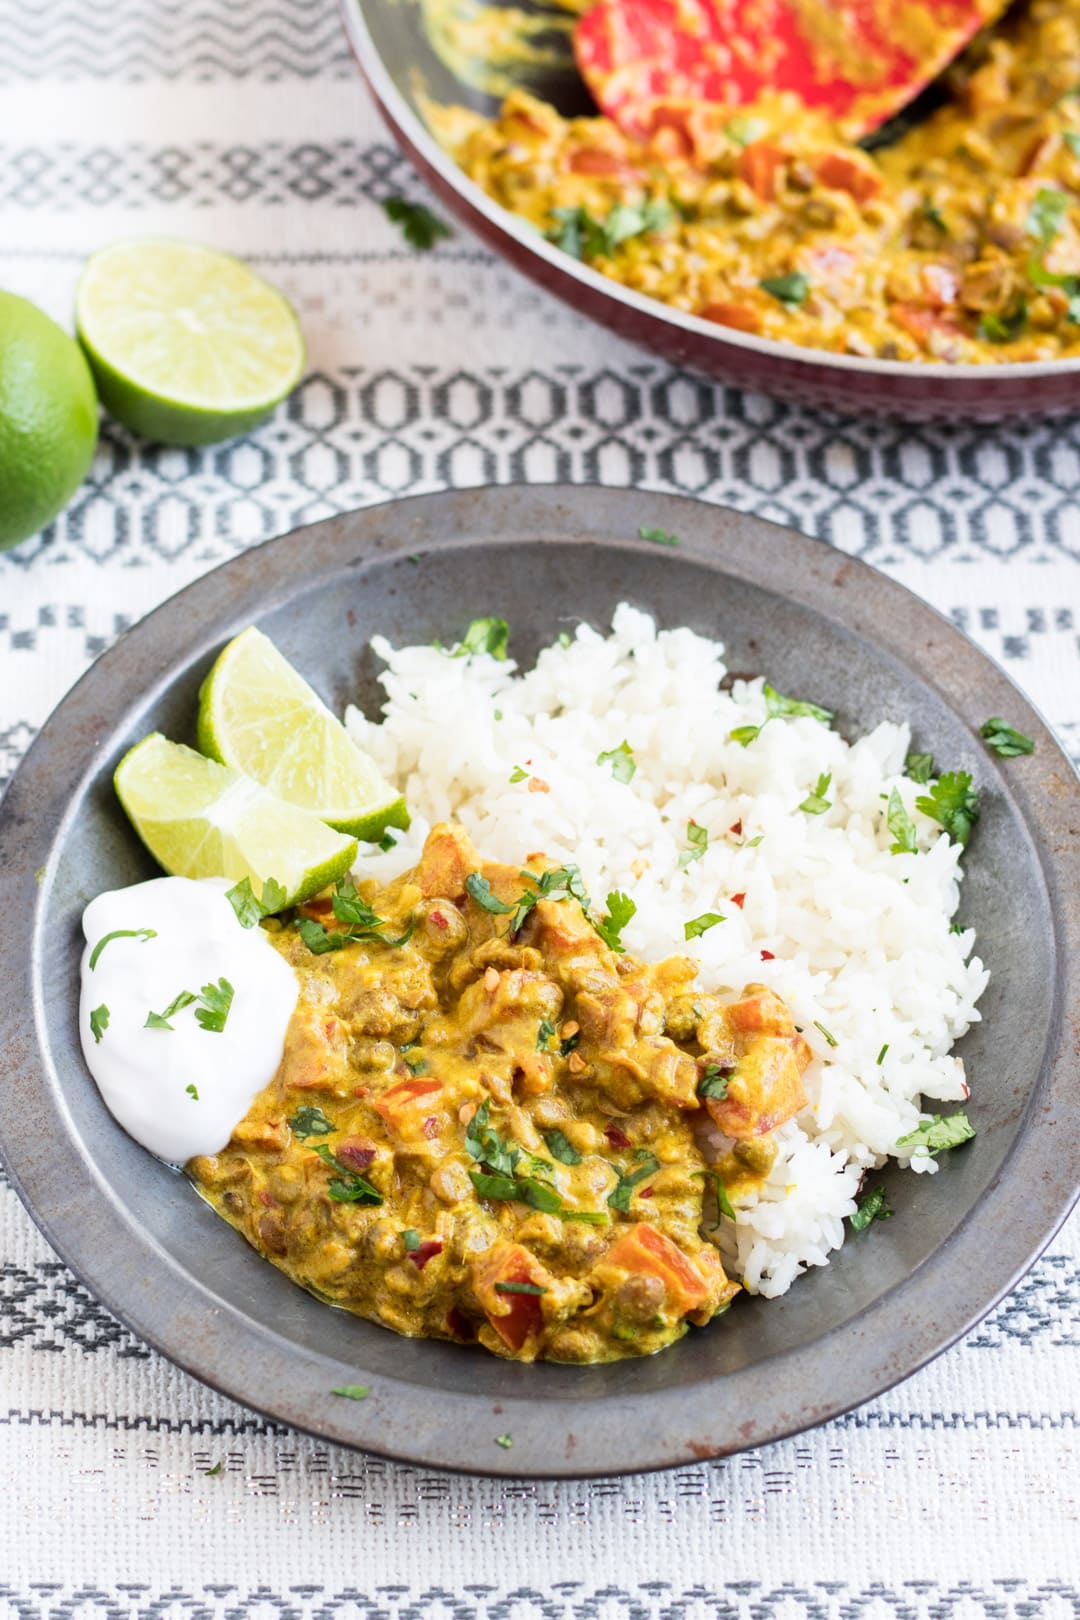 A metal bowl filled with low FODMAP lentil dal and basmati rice garnished with cilantro and served with lime wedges and a dollop of coconut yogurt.